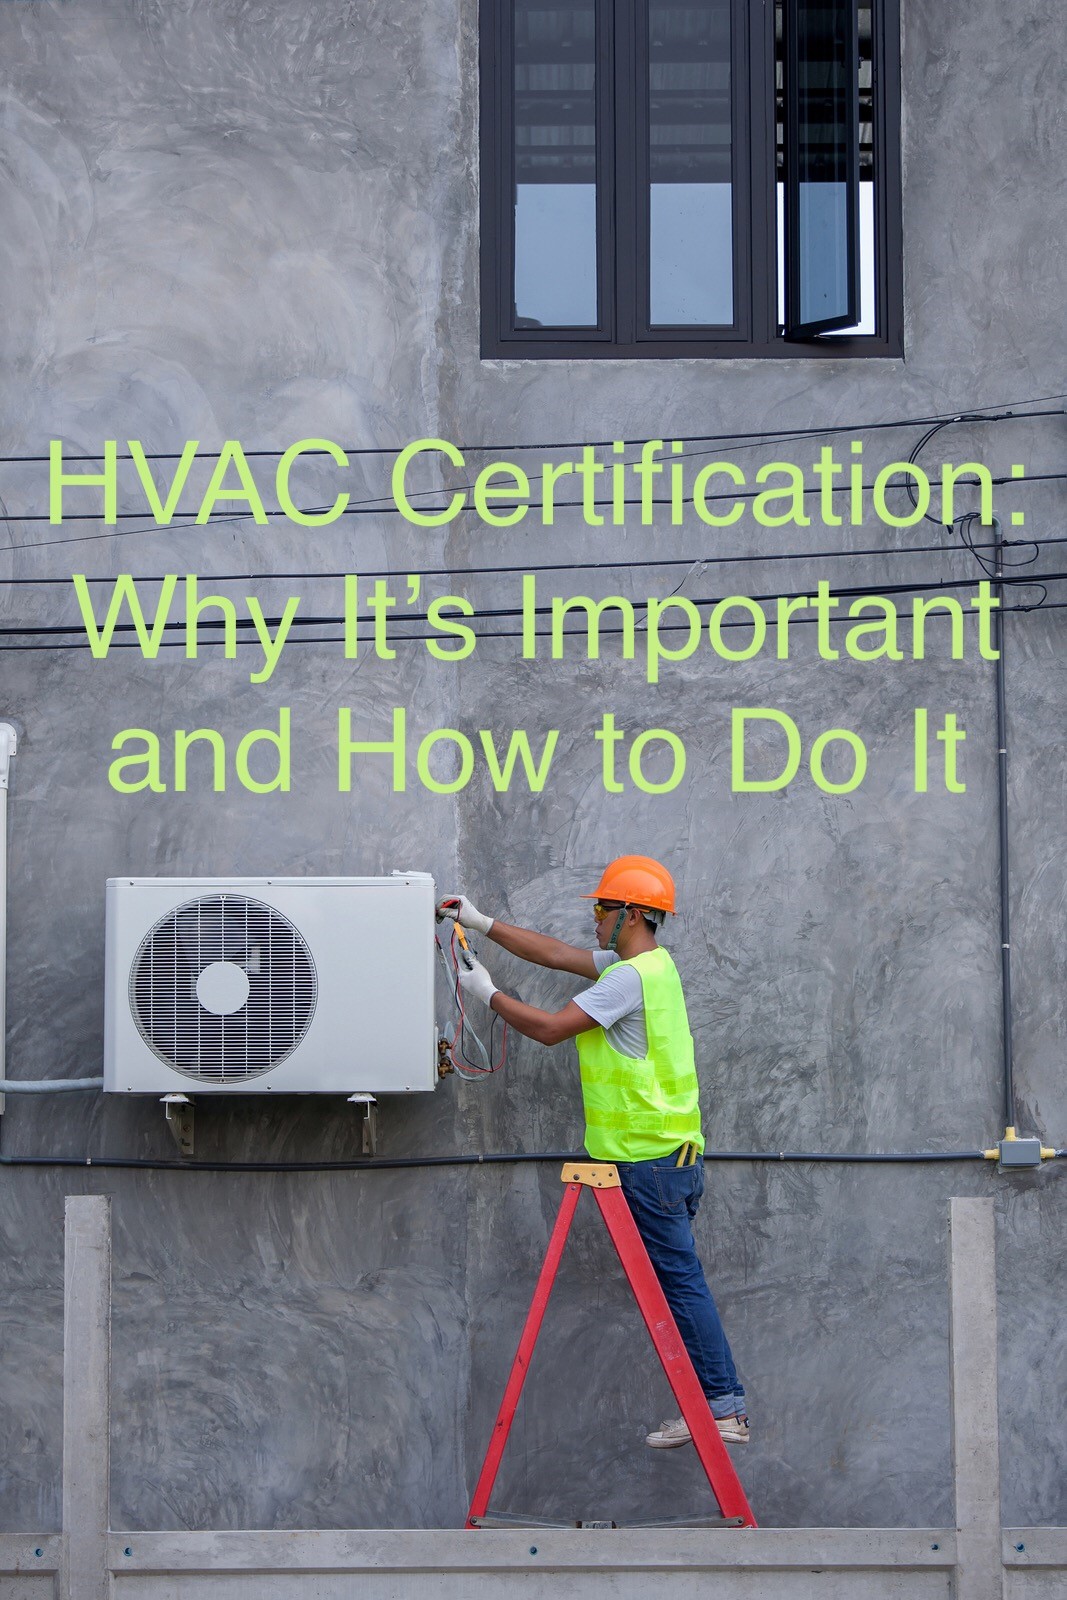 HVAC Certification: Why Get Certified and How to Do It